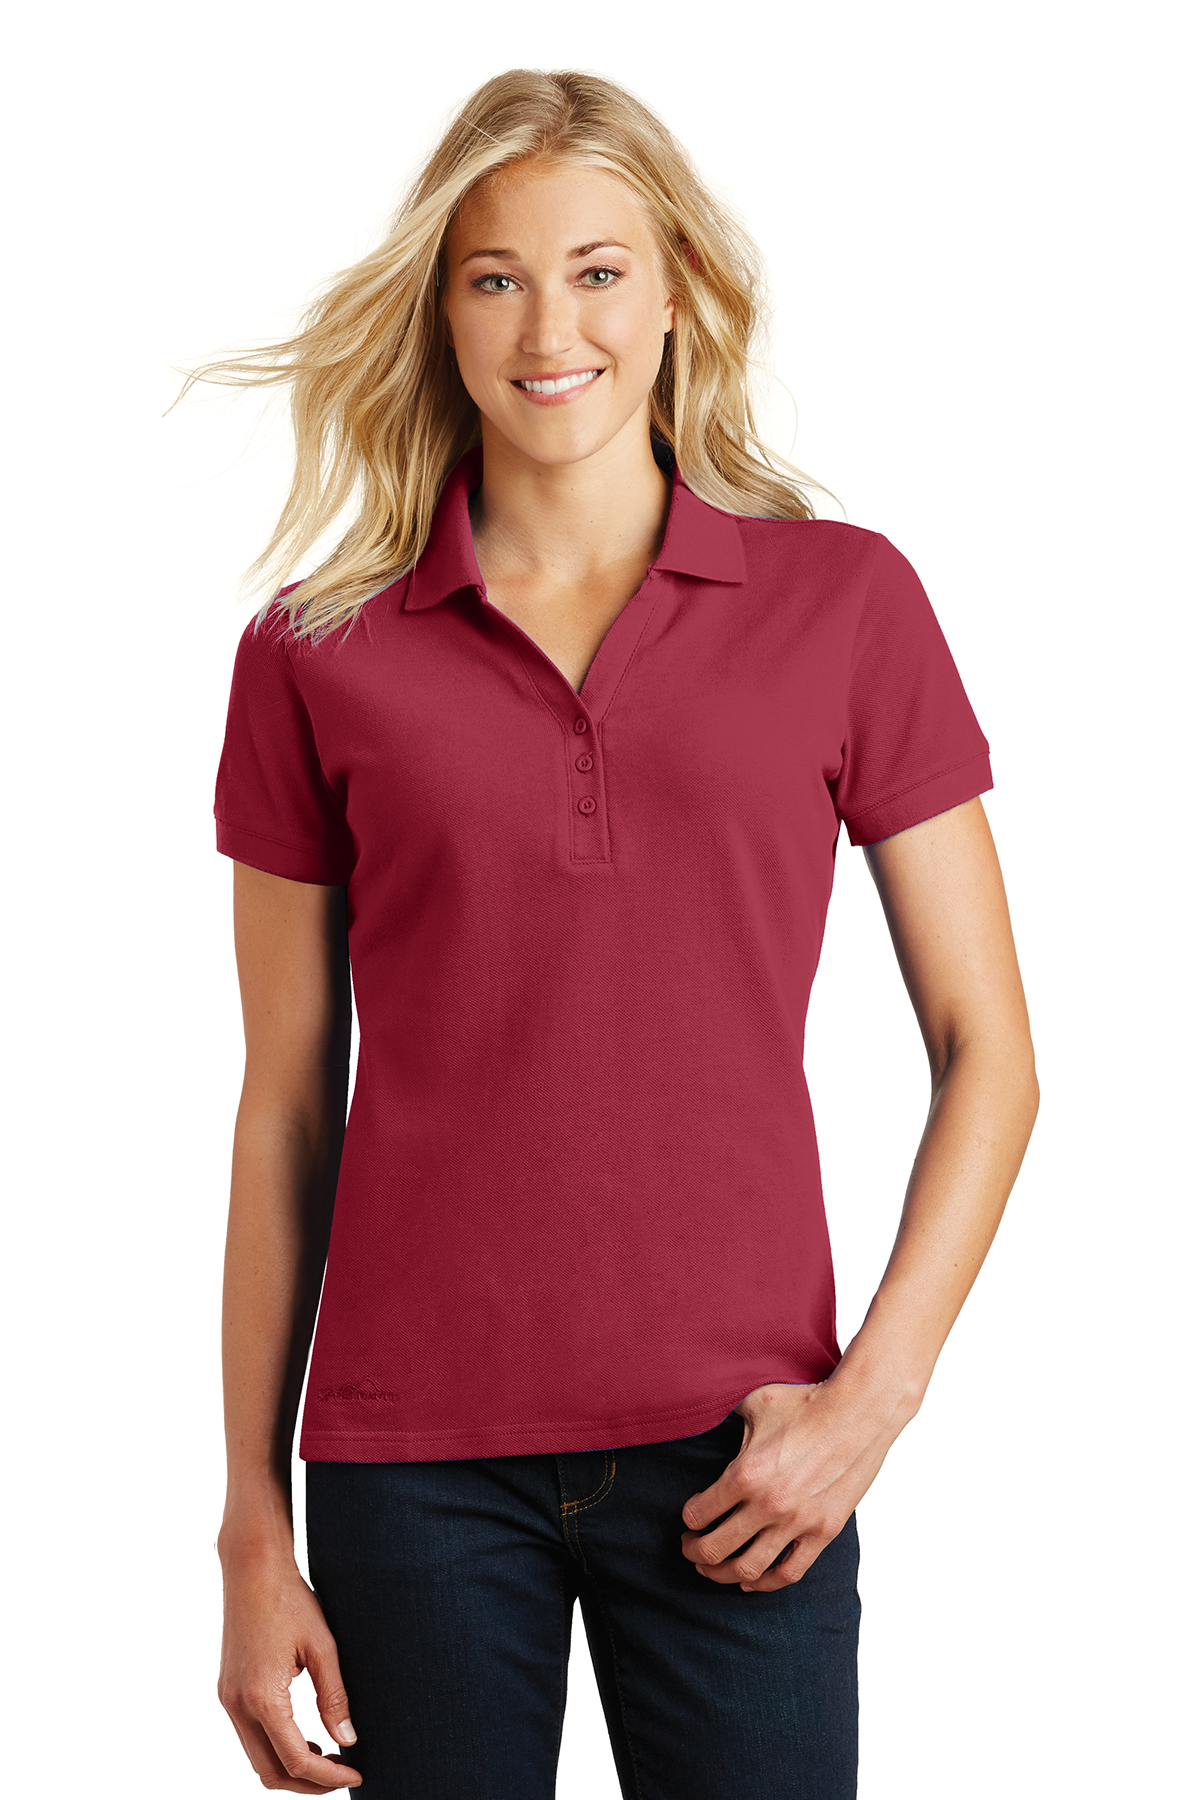 Eddie Bauer Girls Polo Shirt More Styles Available 